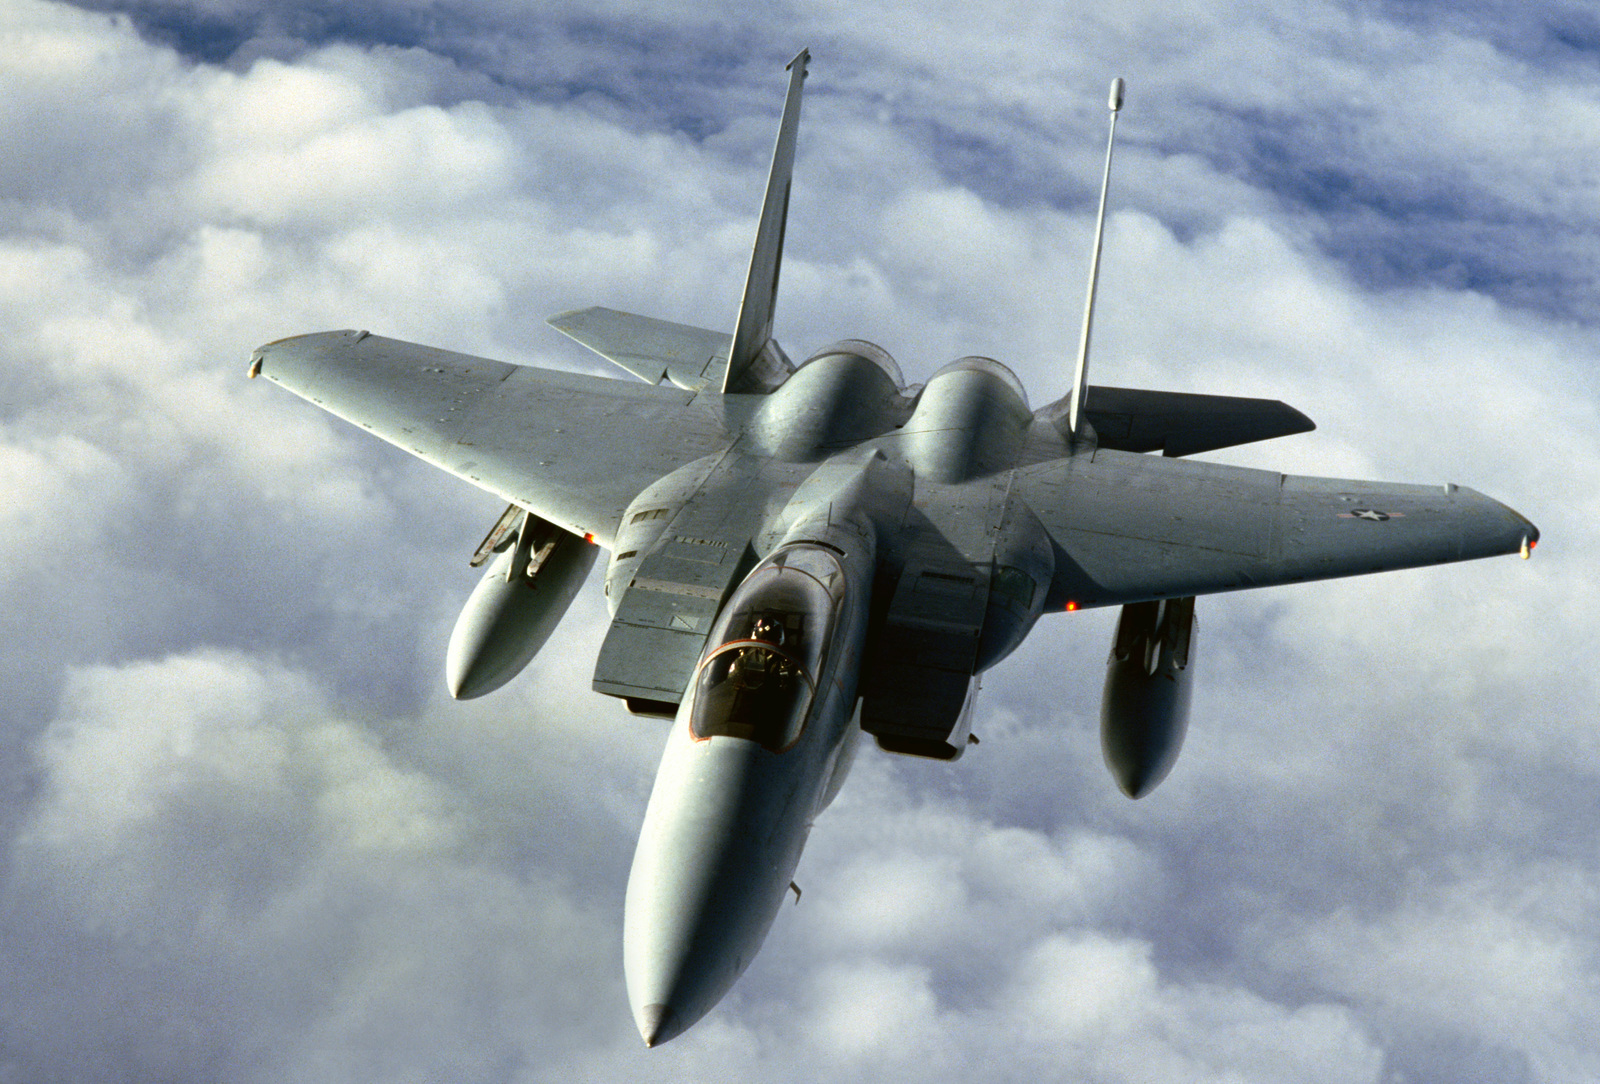 The F-15 is the most badass U.S. fighter jet ever